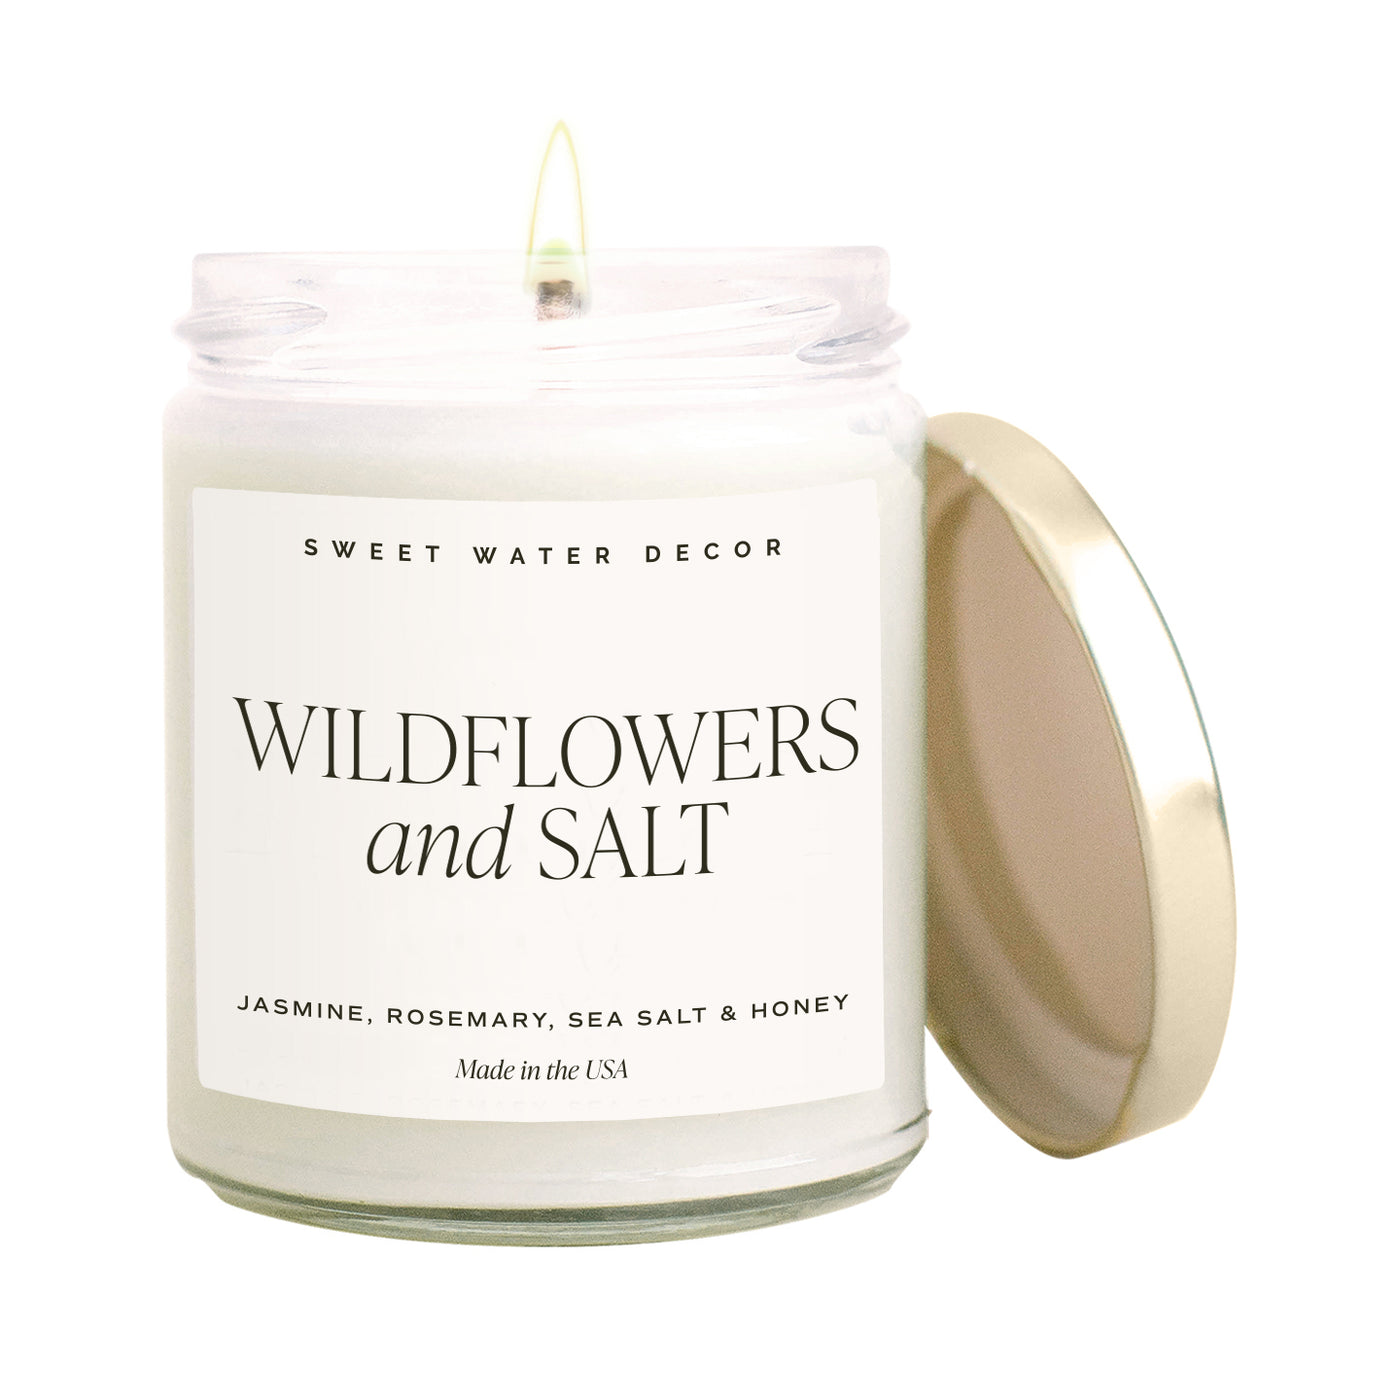 Wildflowers and Salt Soy Candle - Clear Jar - 9 oz